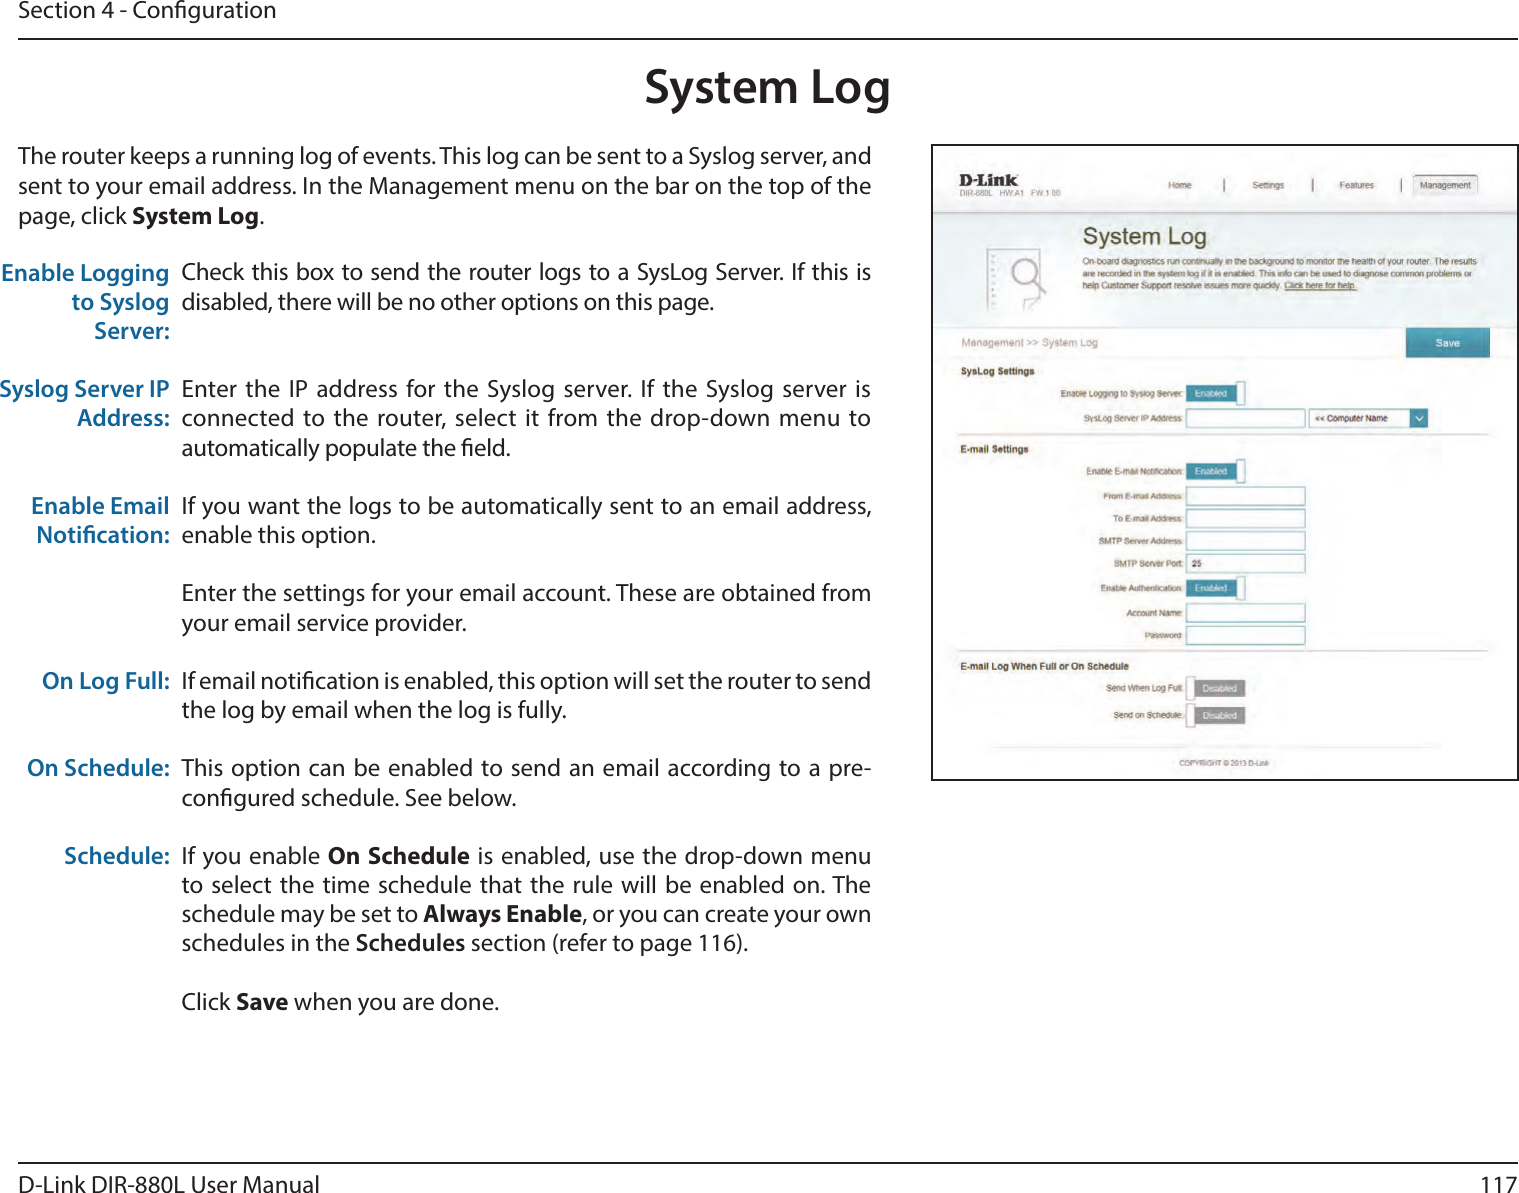 117D-Link DIR-880L User ManualSection 4 - CongurationSystem LogCheck this box to send the router logs to a SysLog Server. If this is disabled, there will be no other options on this page.Enter the IP address for the Syslog server. If the Syslog server is connected to the  router, select it from  the drop-down  menu to automatically populate the eld. If you want the logs to be automatically sent to an email address, enable this option.Enter the settings for your email account. These are obtained from your email service provider.If email notication is enabled, this option will set the router to send the log by email when the log is fully.This option can be enabled to send an email according to a pre-congured schedule. See below.If you enable On Schedule is enabled, use the drop-down menu to select the time schedule that the rule will be enabled on. The schedule may be set to Always Enable, or you can create your own schedules in the Schedules section (refer to page 116).Click Save when you are done.Enable Logging to Syslog Server:Syslog Server IP Address:Enable Email Notication:On Log Full:On Schedule:Schedule:The router keeps a running log of events. This log can be sent to a Syslog server, and sent to your email address. In the Management menu on the bar on the top of the page, click System Log. 